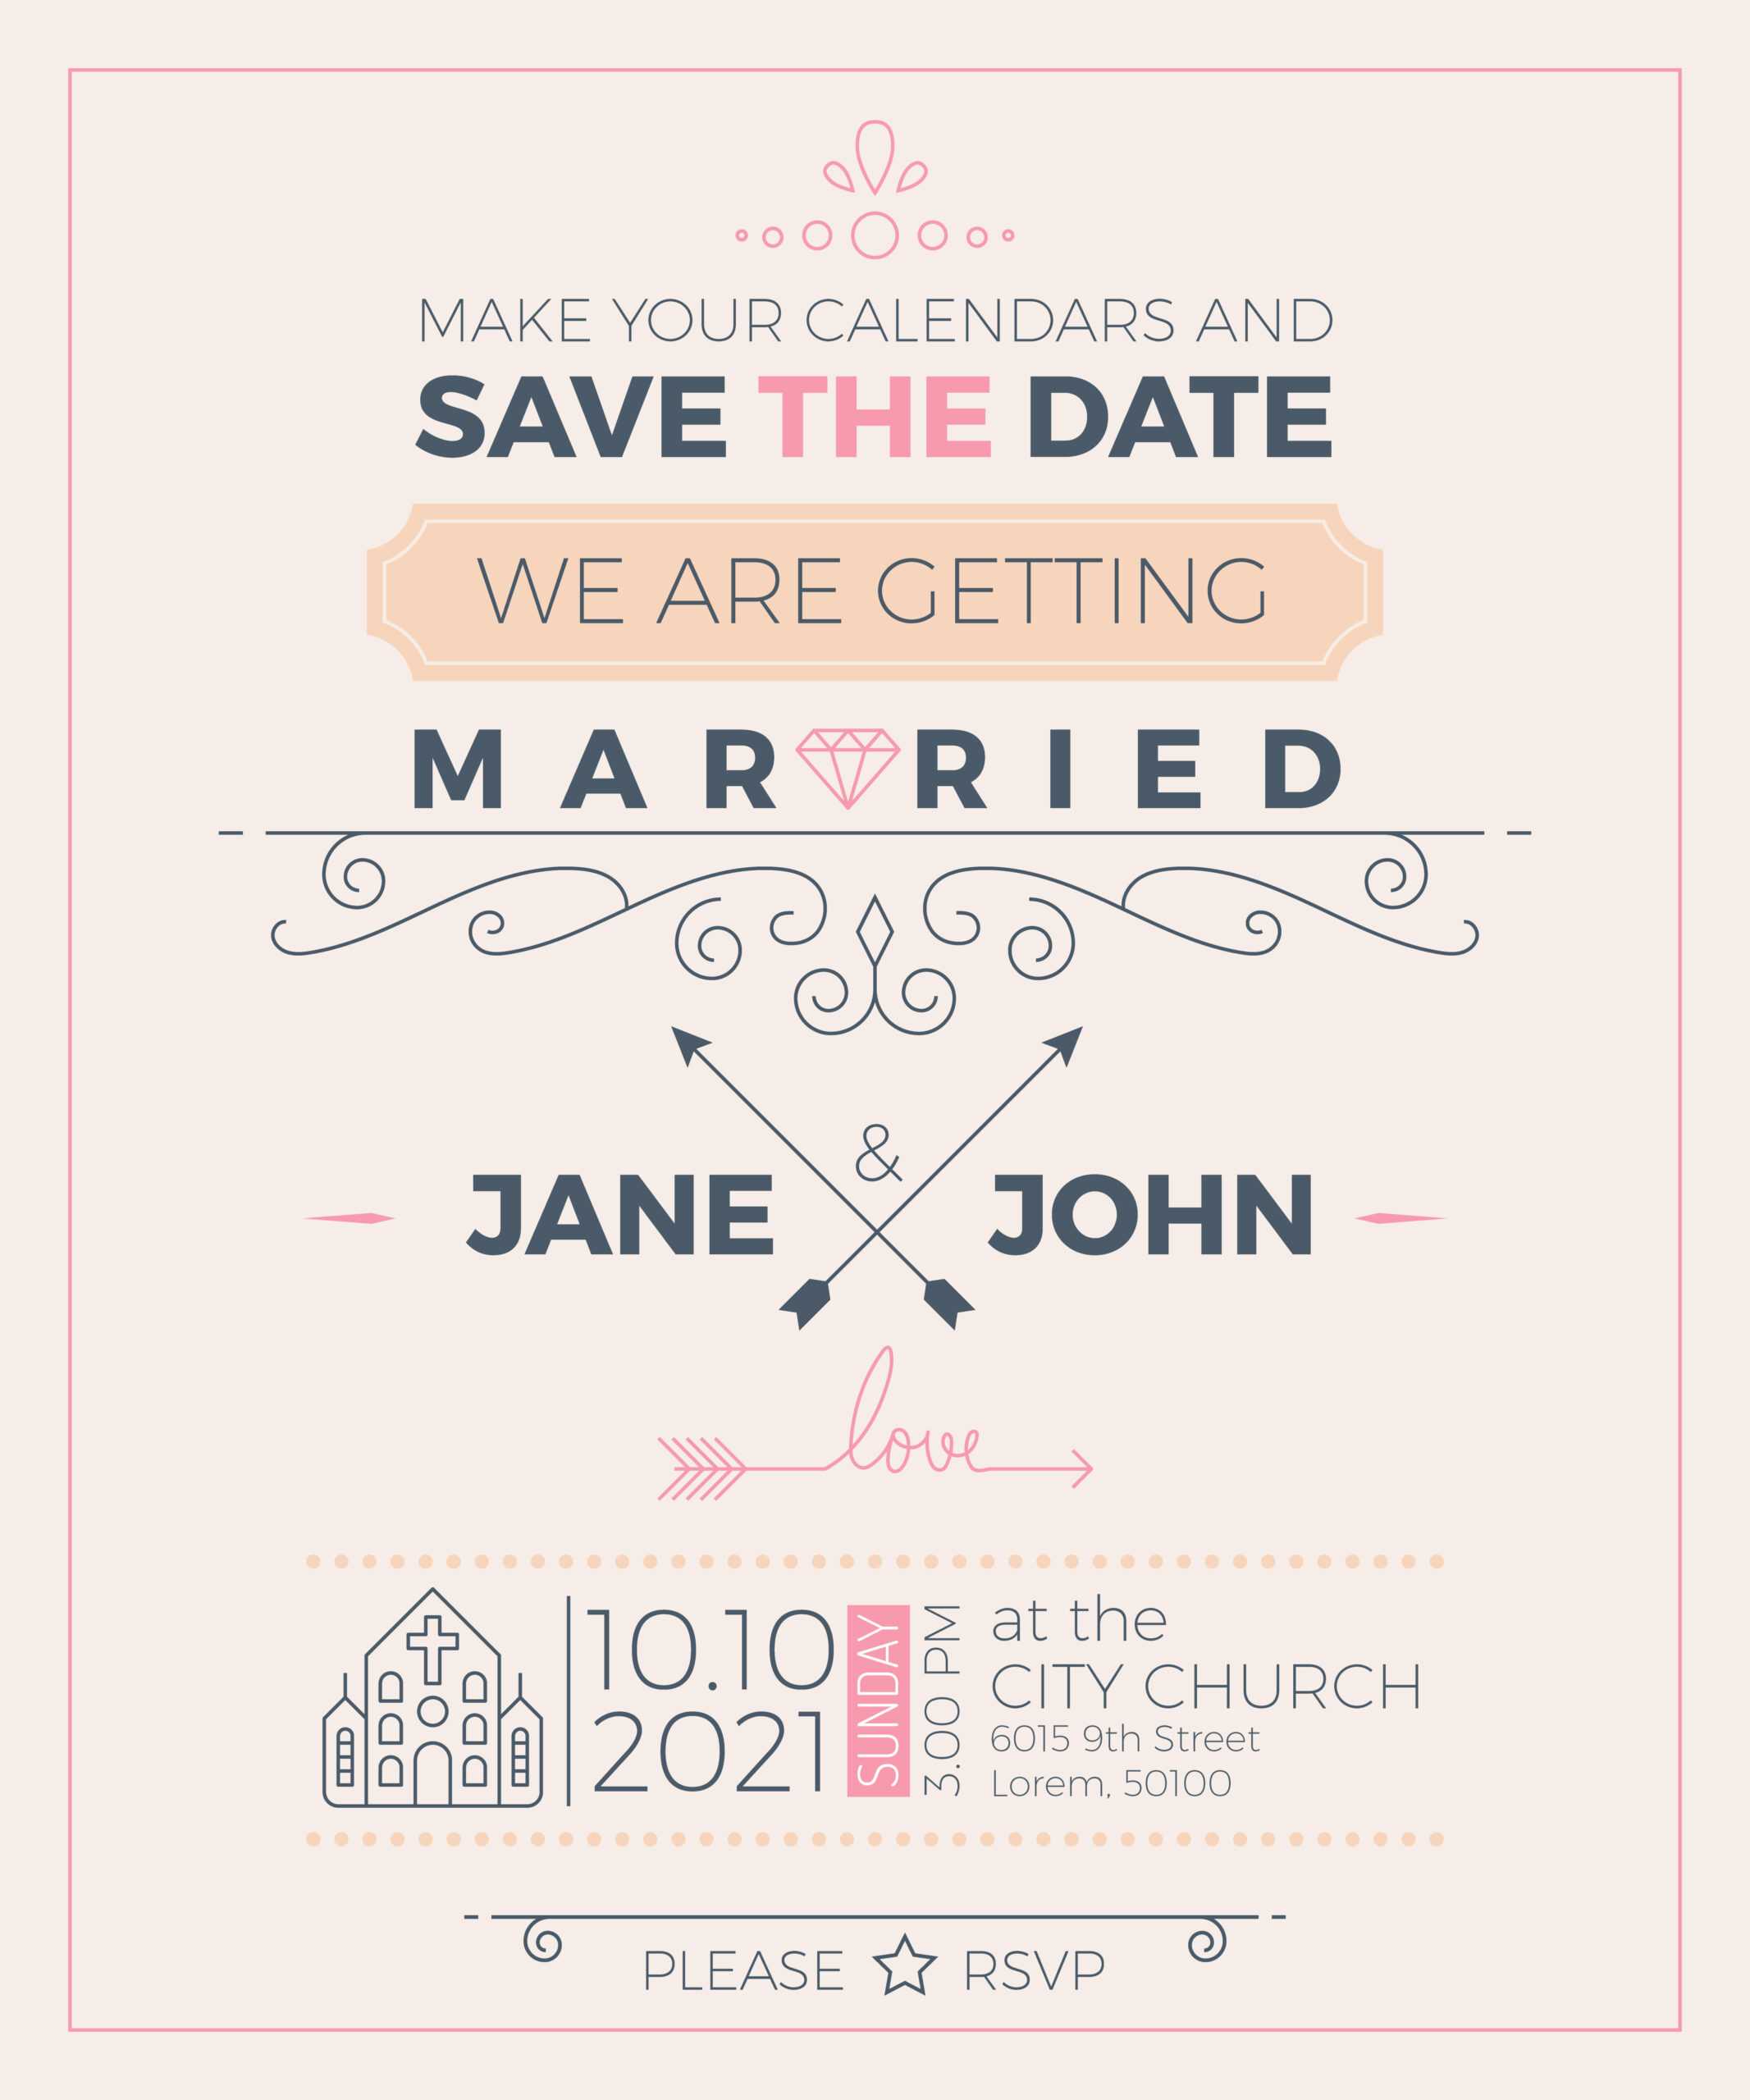 Vintage Wedding Invitation Card Template – Download Free With Regard To Church Wedding Invitation Card Template